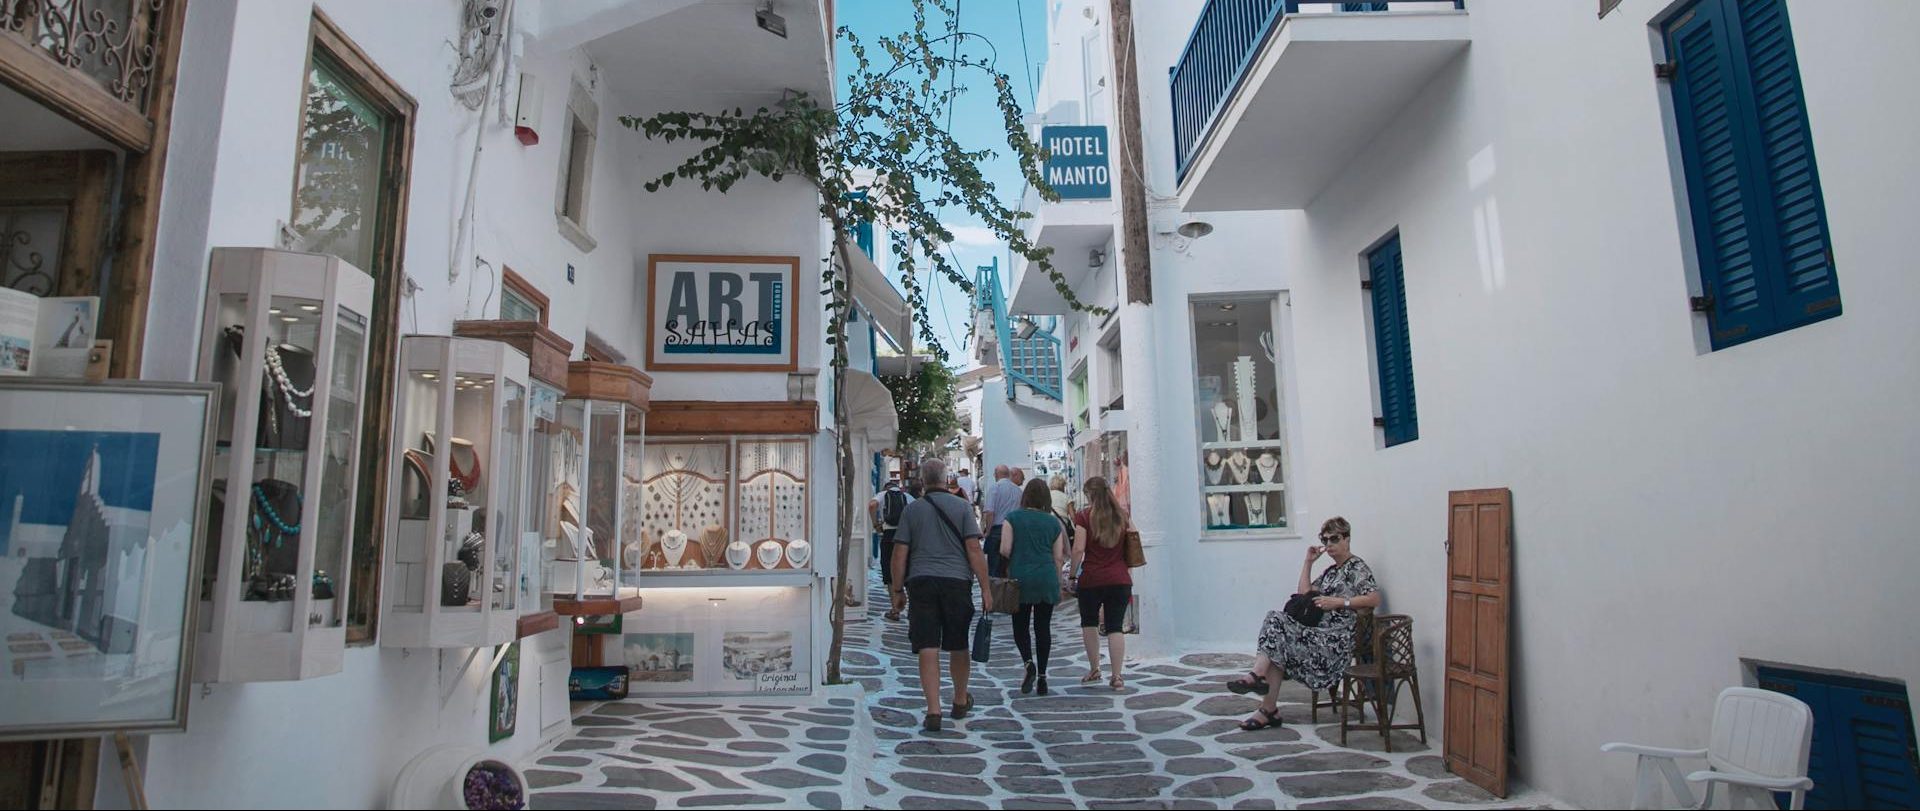 People in Greece - Is It Cheaper to Live in Greece or the UK